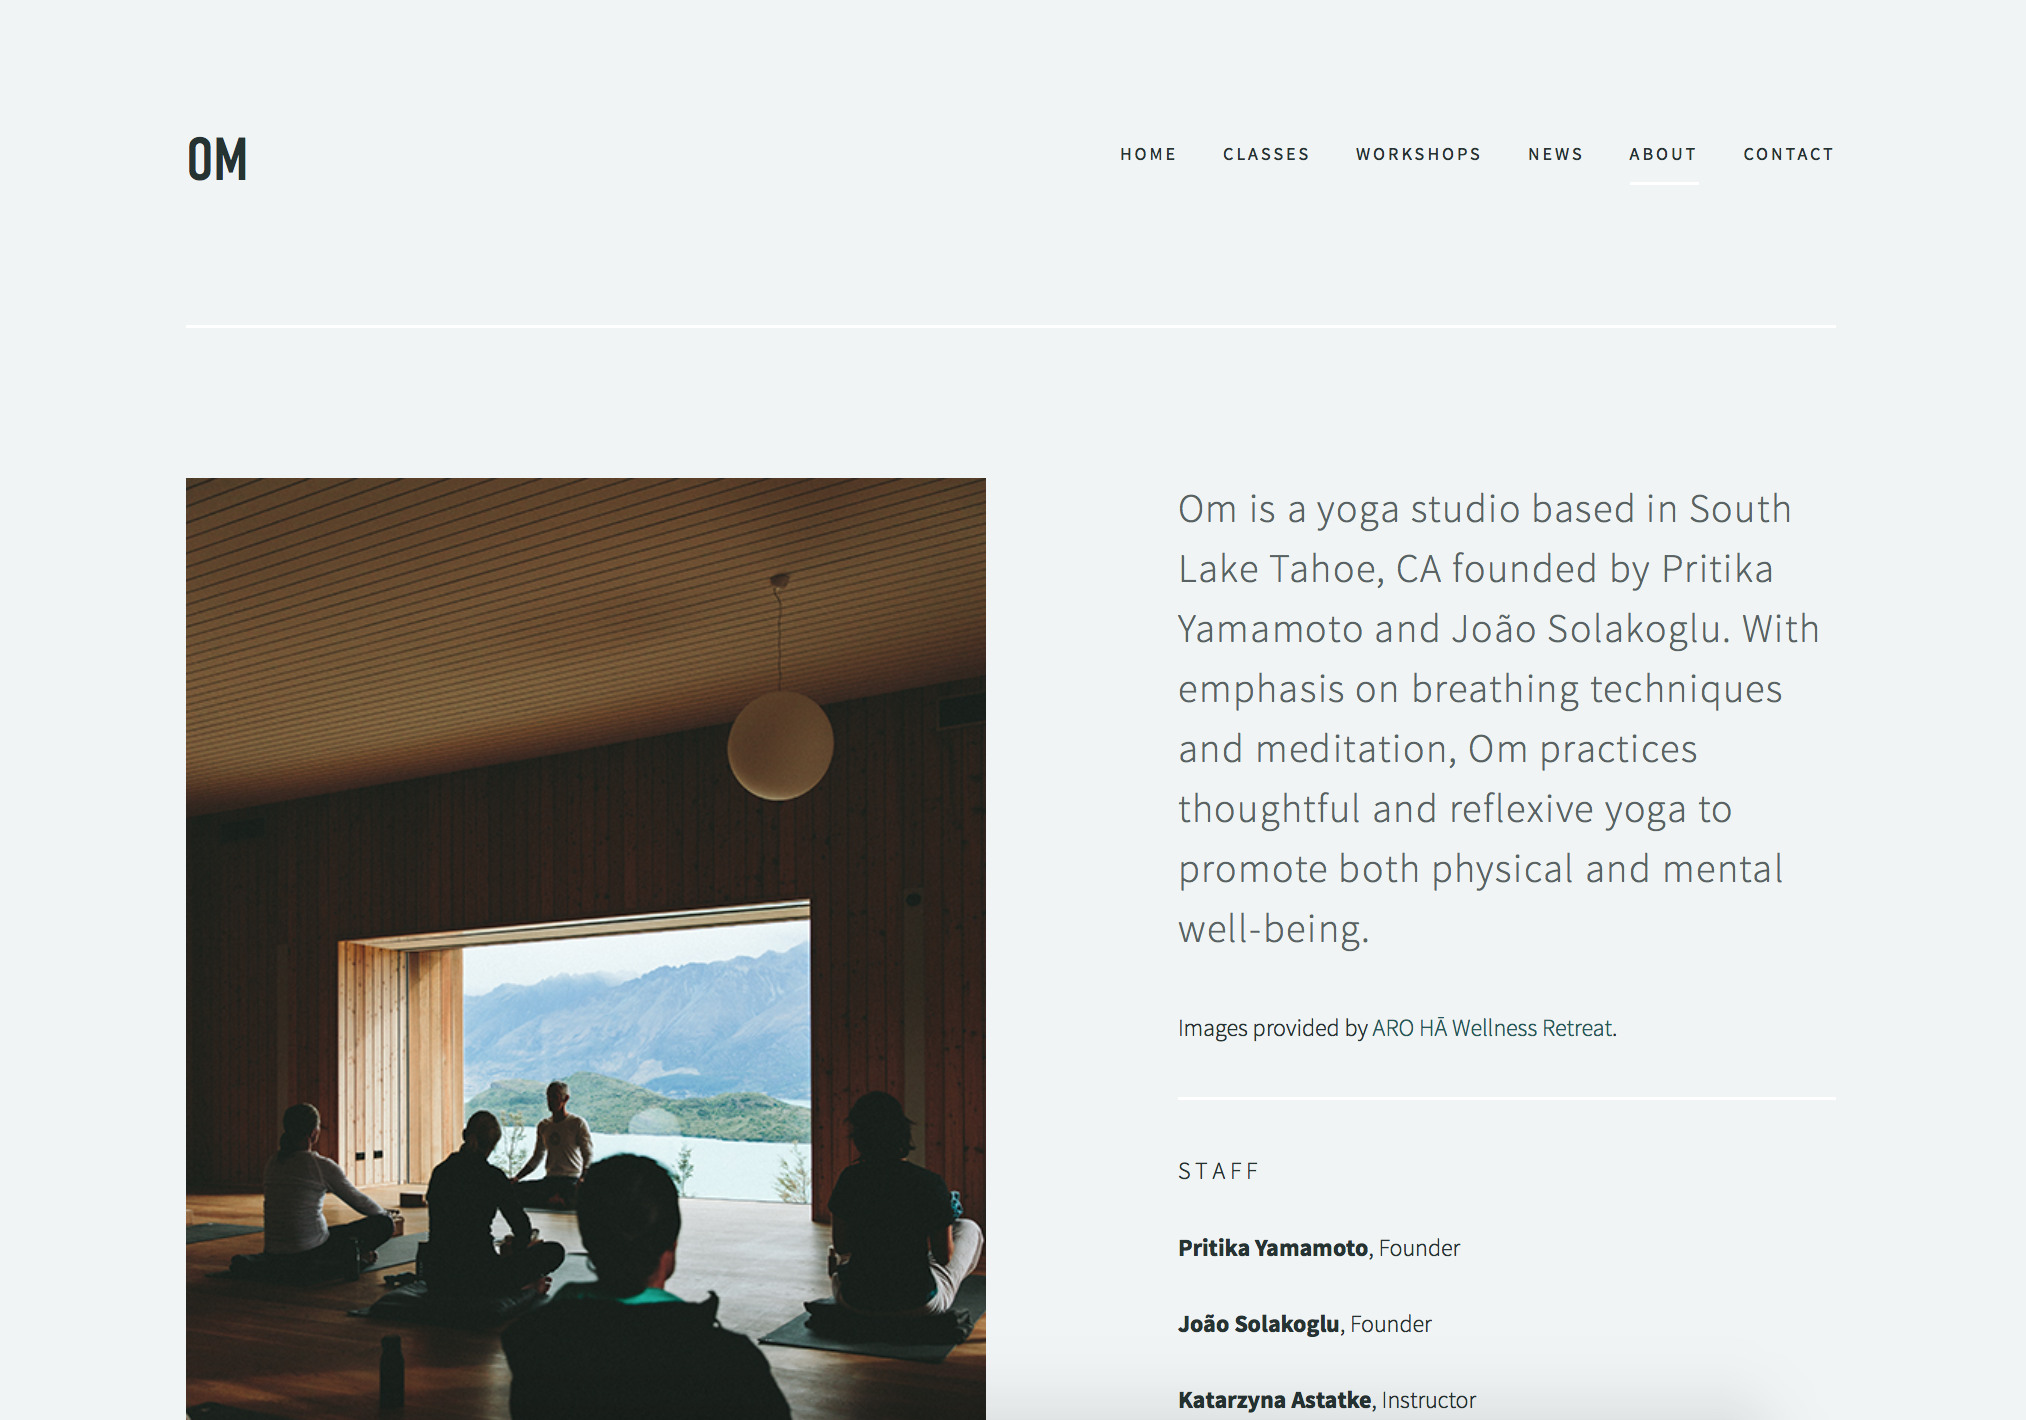 8 of My Favorite Squarespace Templates for Creative Businesses